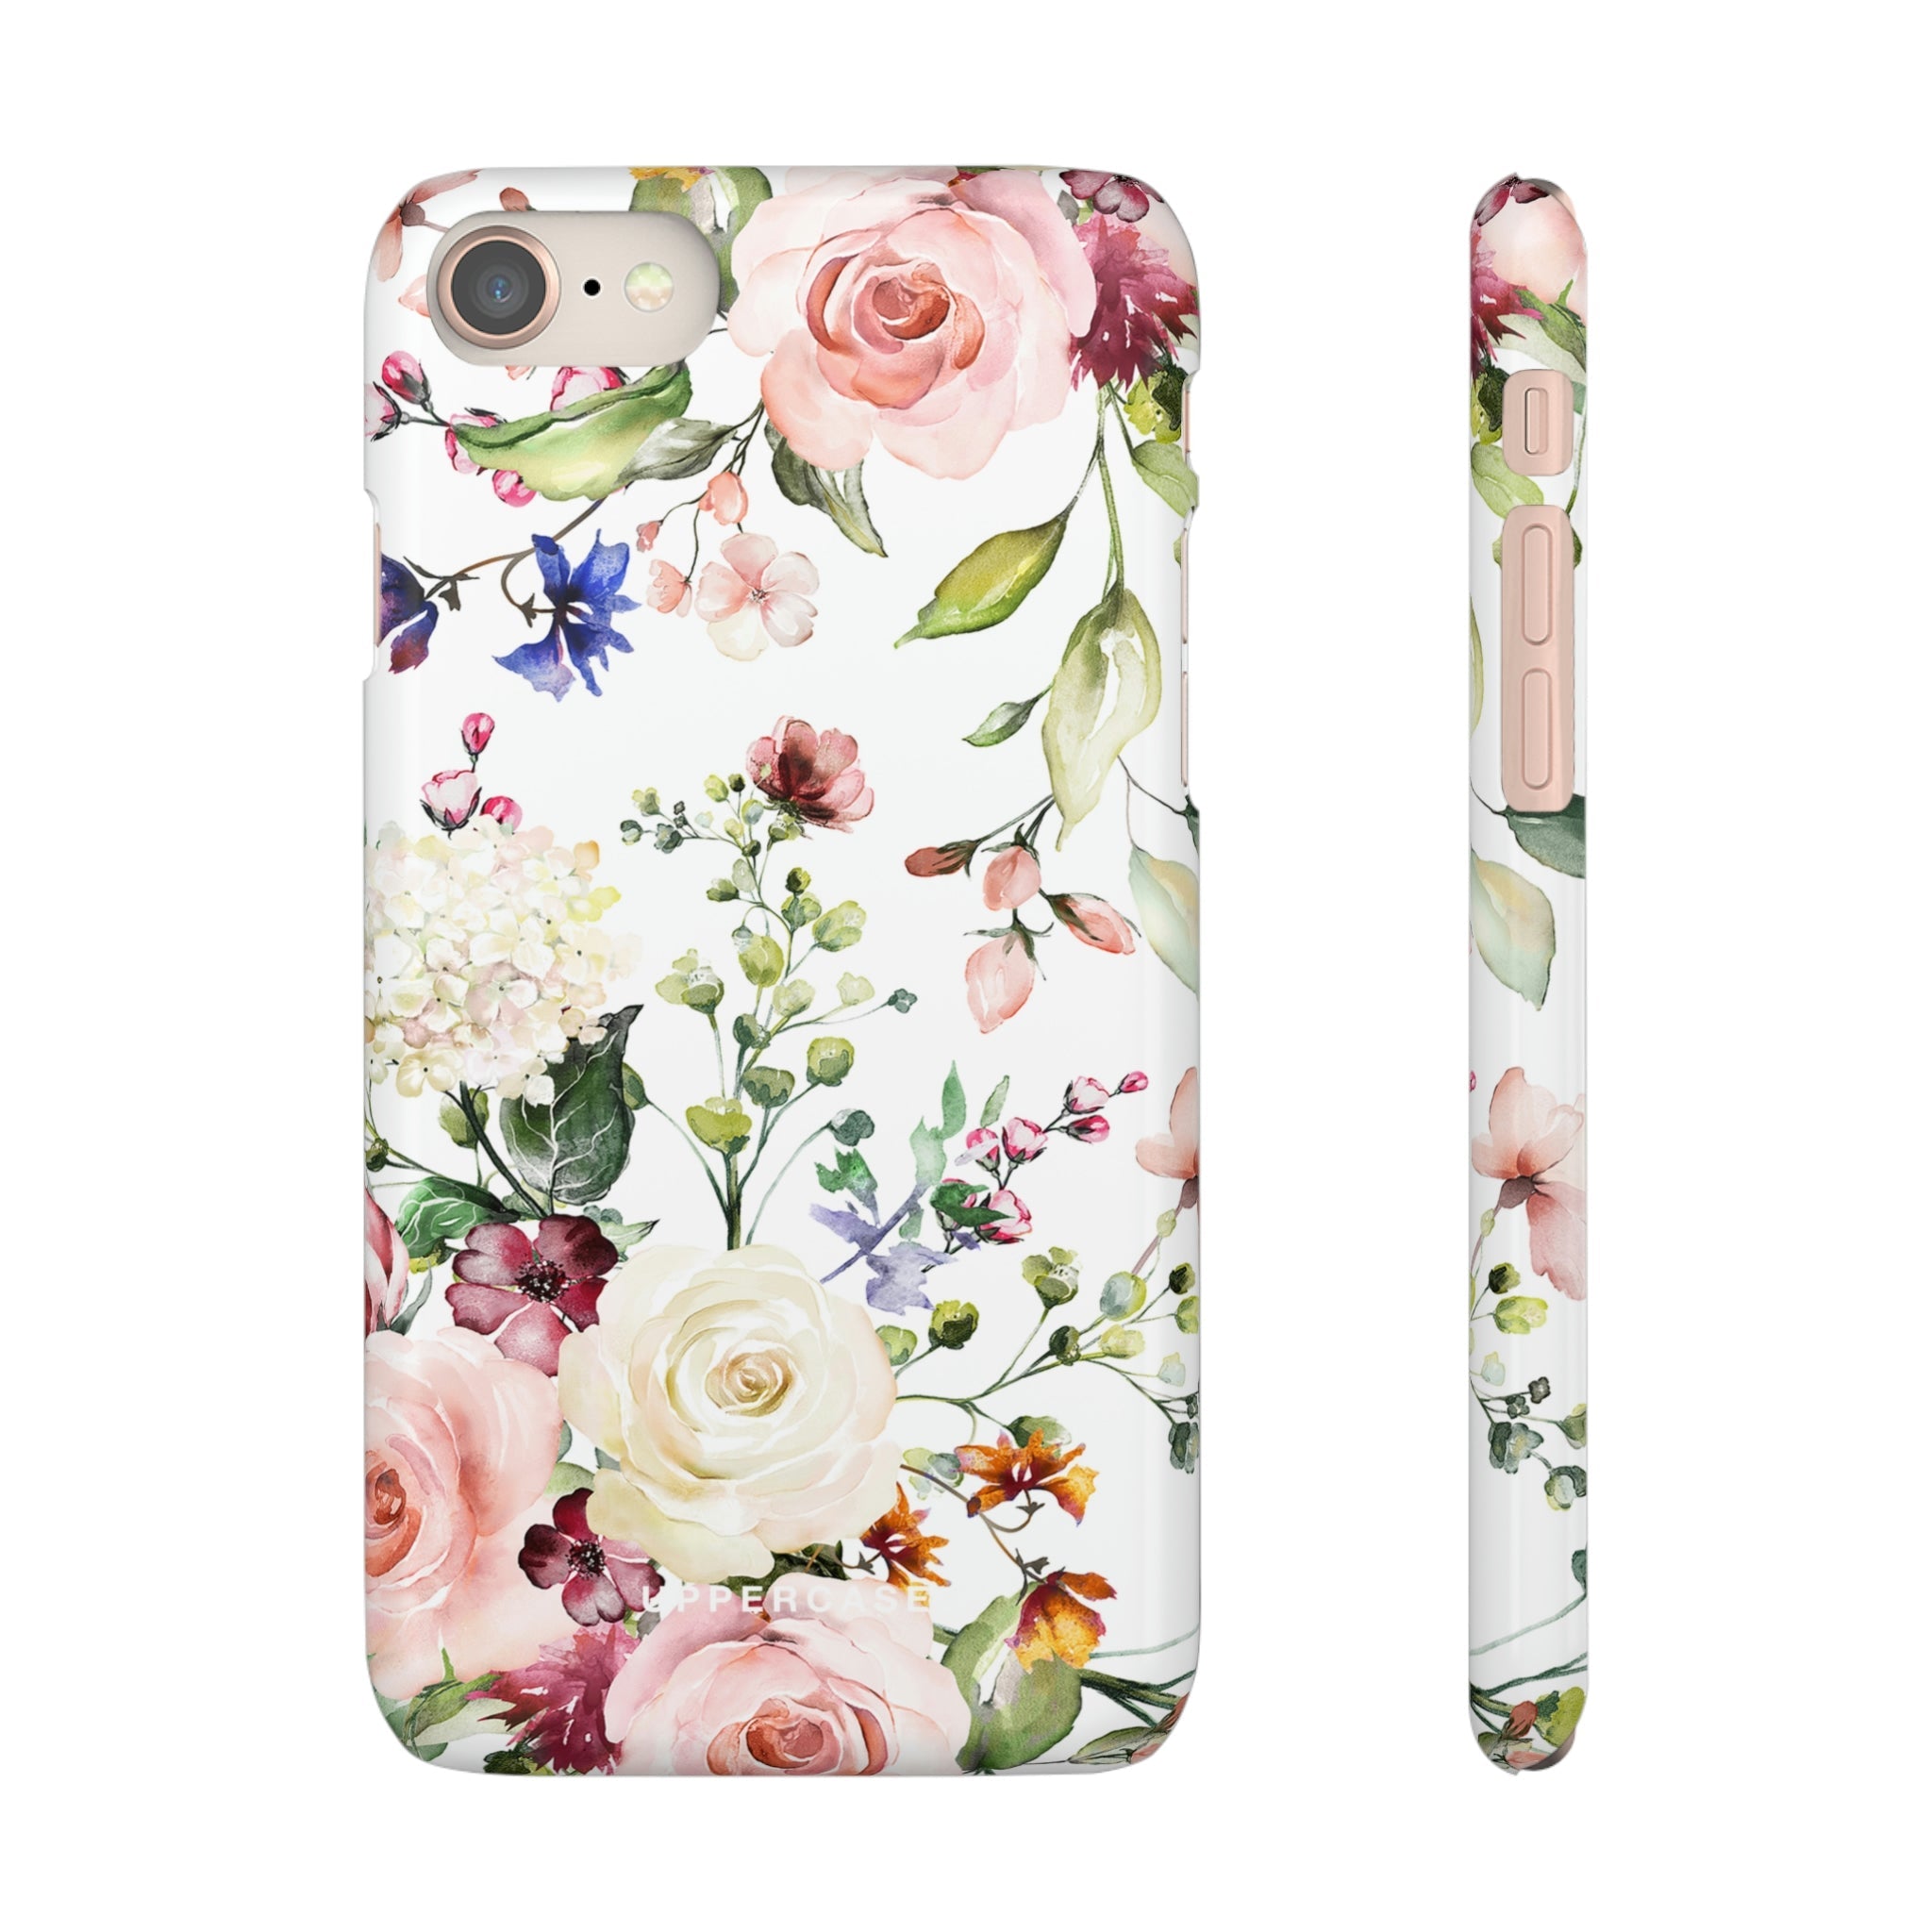 Floral Bliss - White - Snap Case